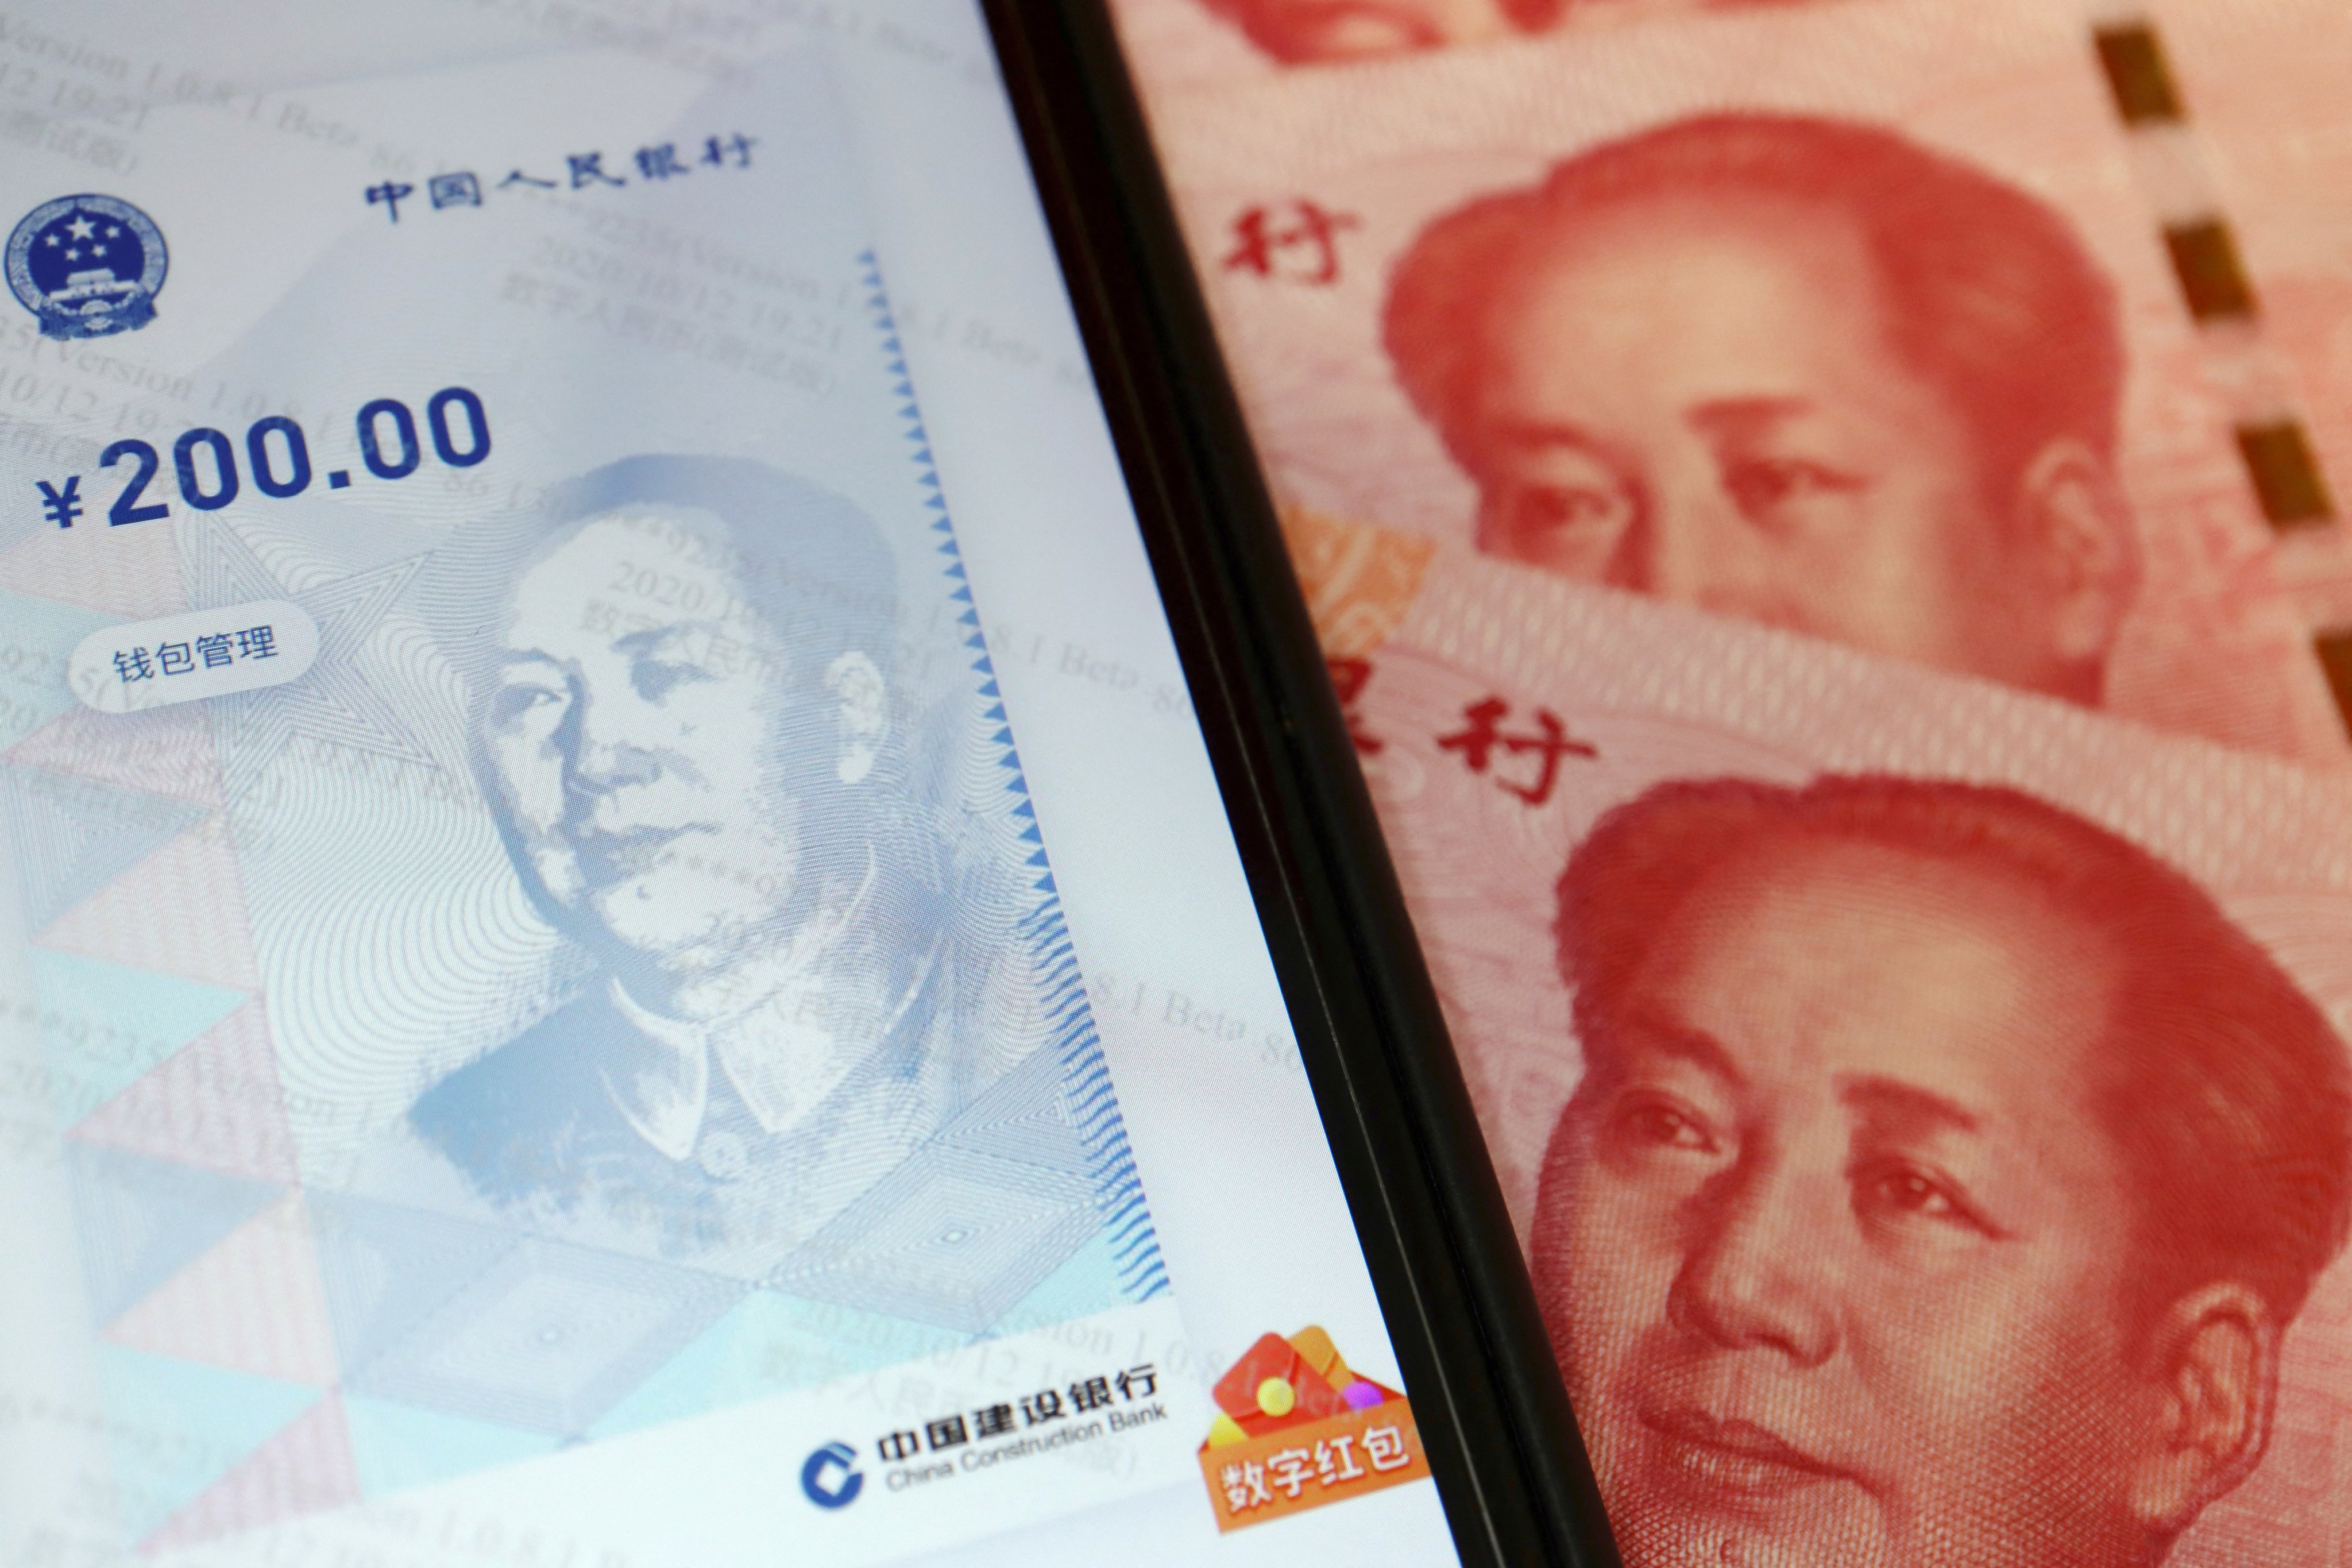 China’s official app for the digital yuan seen on a mobile phone next to 100-yuan banknotes in this illustration picture taken October 16, 2020. The digital yuan was seen as a response to cryptocurrencies, but the underlying technology is quite different. Photo: Reuters